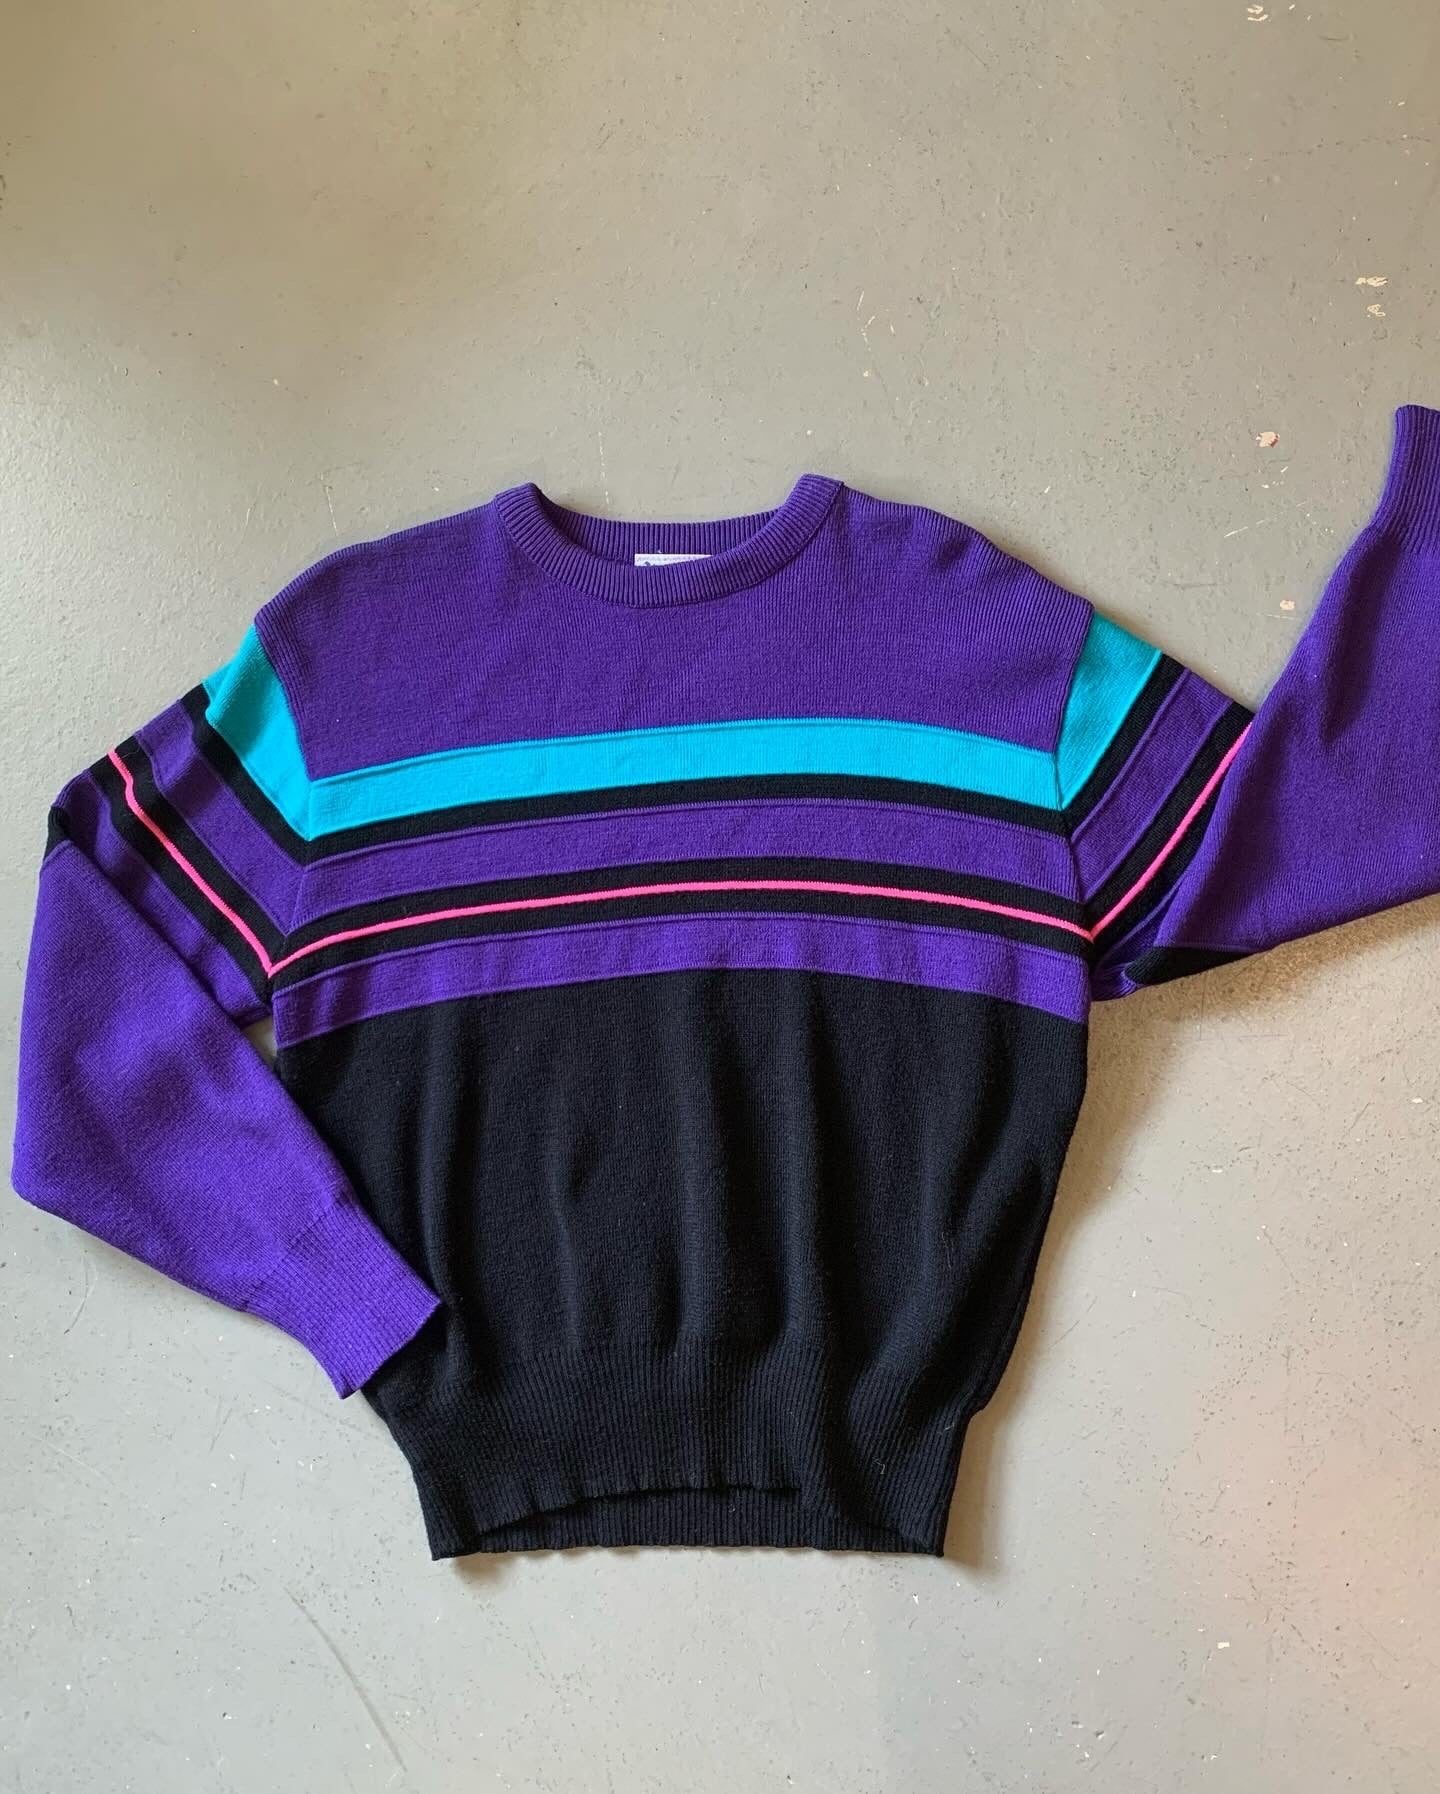 Meister vintage purple, black and neon pink striped sweater. Tag size small.